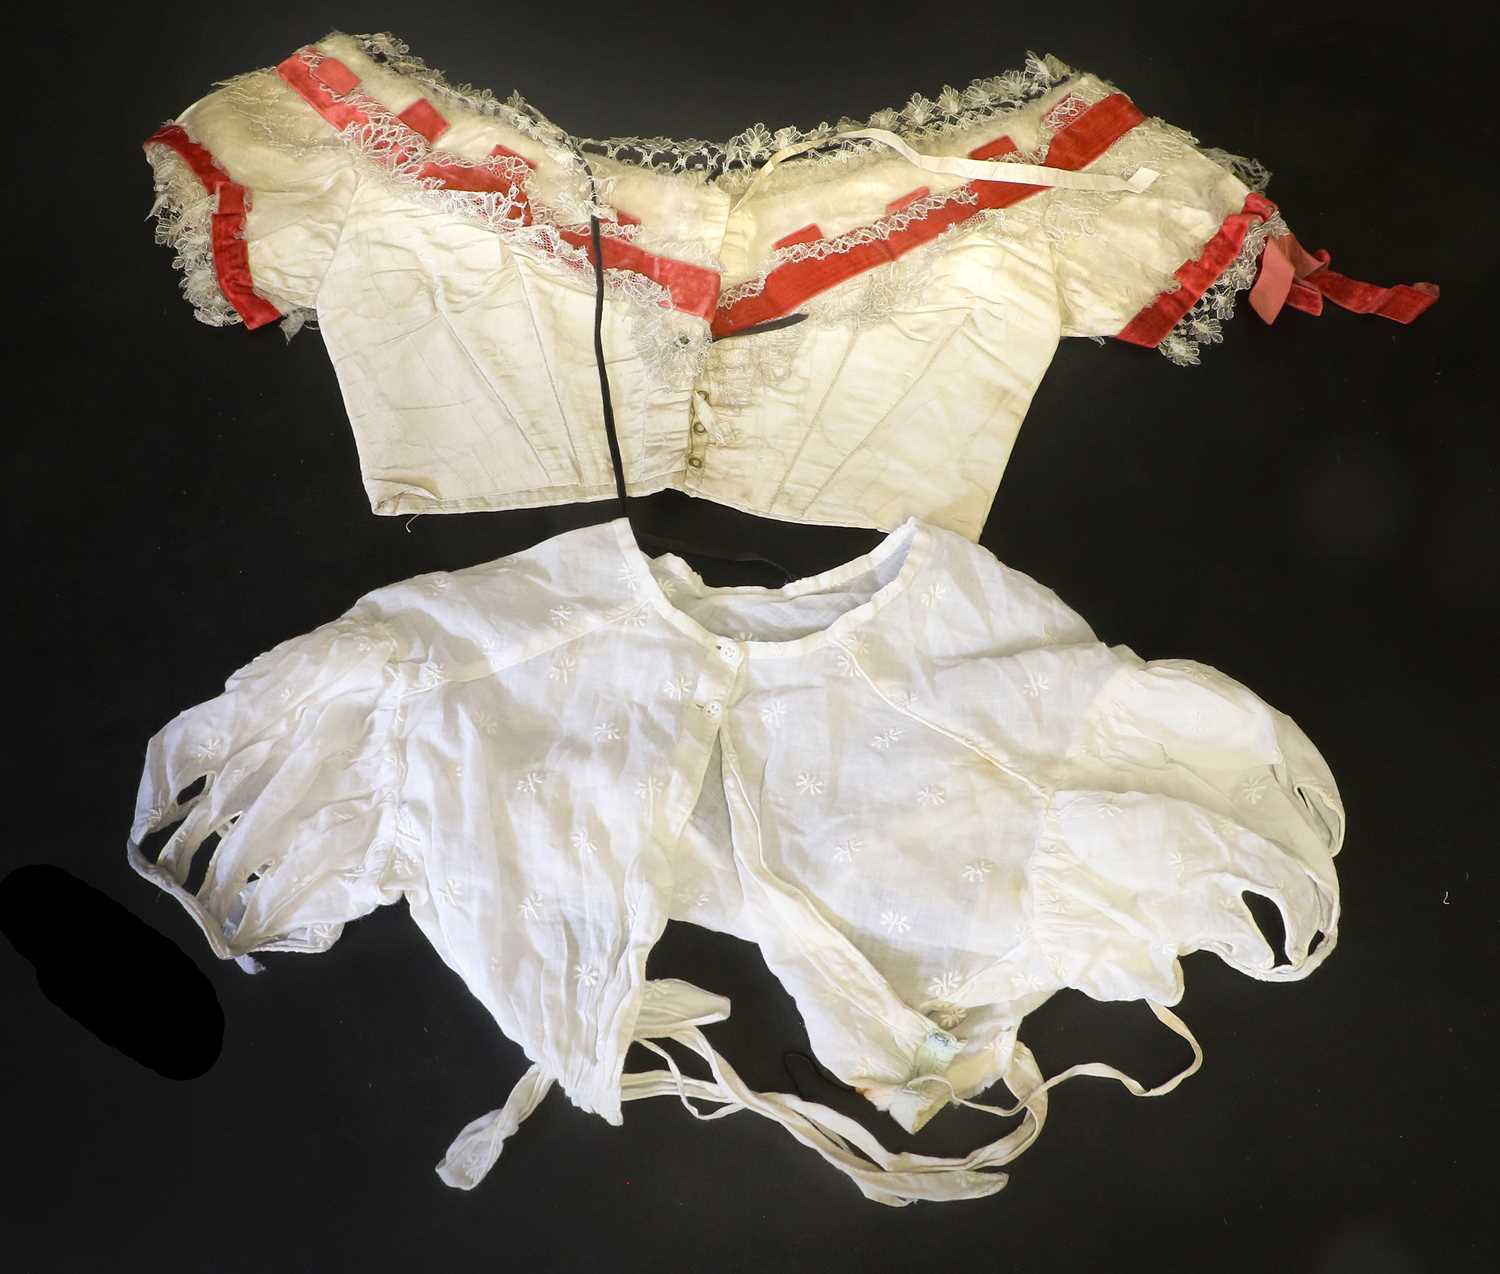 18th and 19th Century Silk Bodices and Remnants, comprising a circa 1740s Spitalfields example - Image 3 of 4